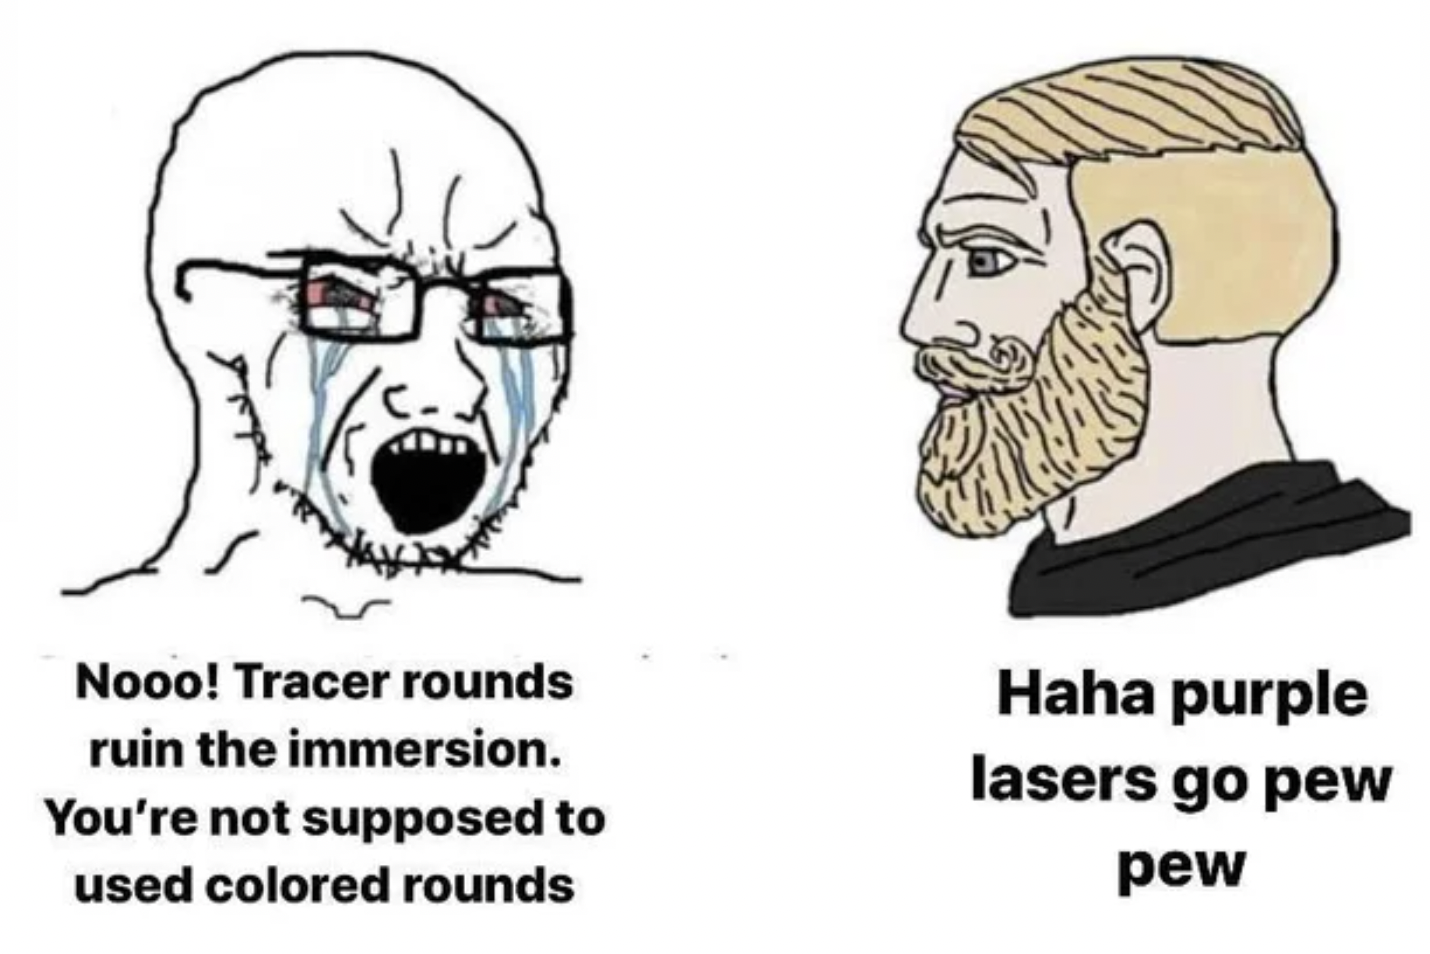 Call of Duty Memes - cartoon - Nooo! Tracer rounds ruin the immersion. You're not supposed to used colored rounds Haha purple lasers go pew pew